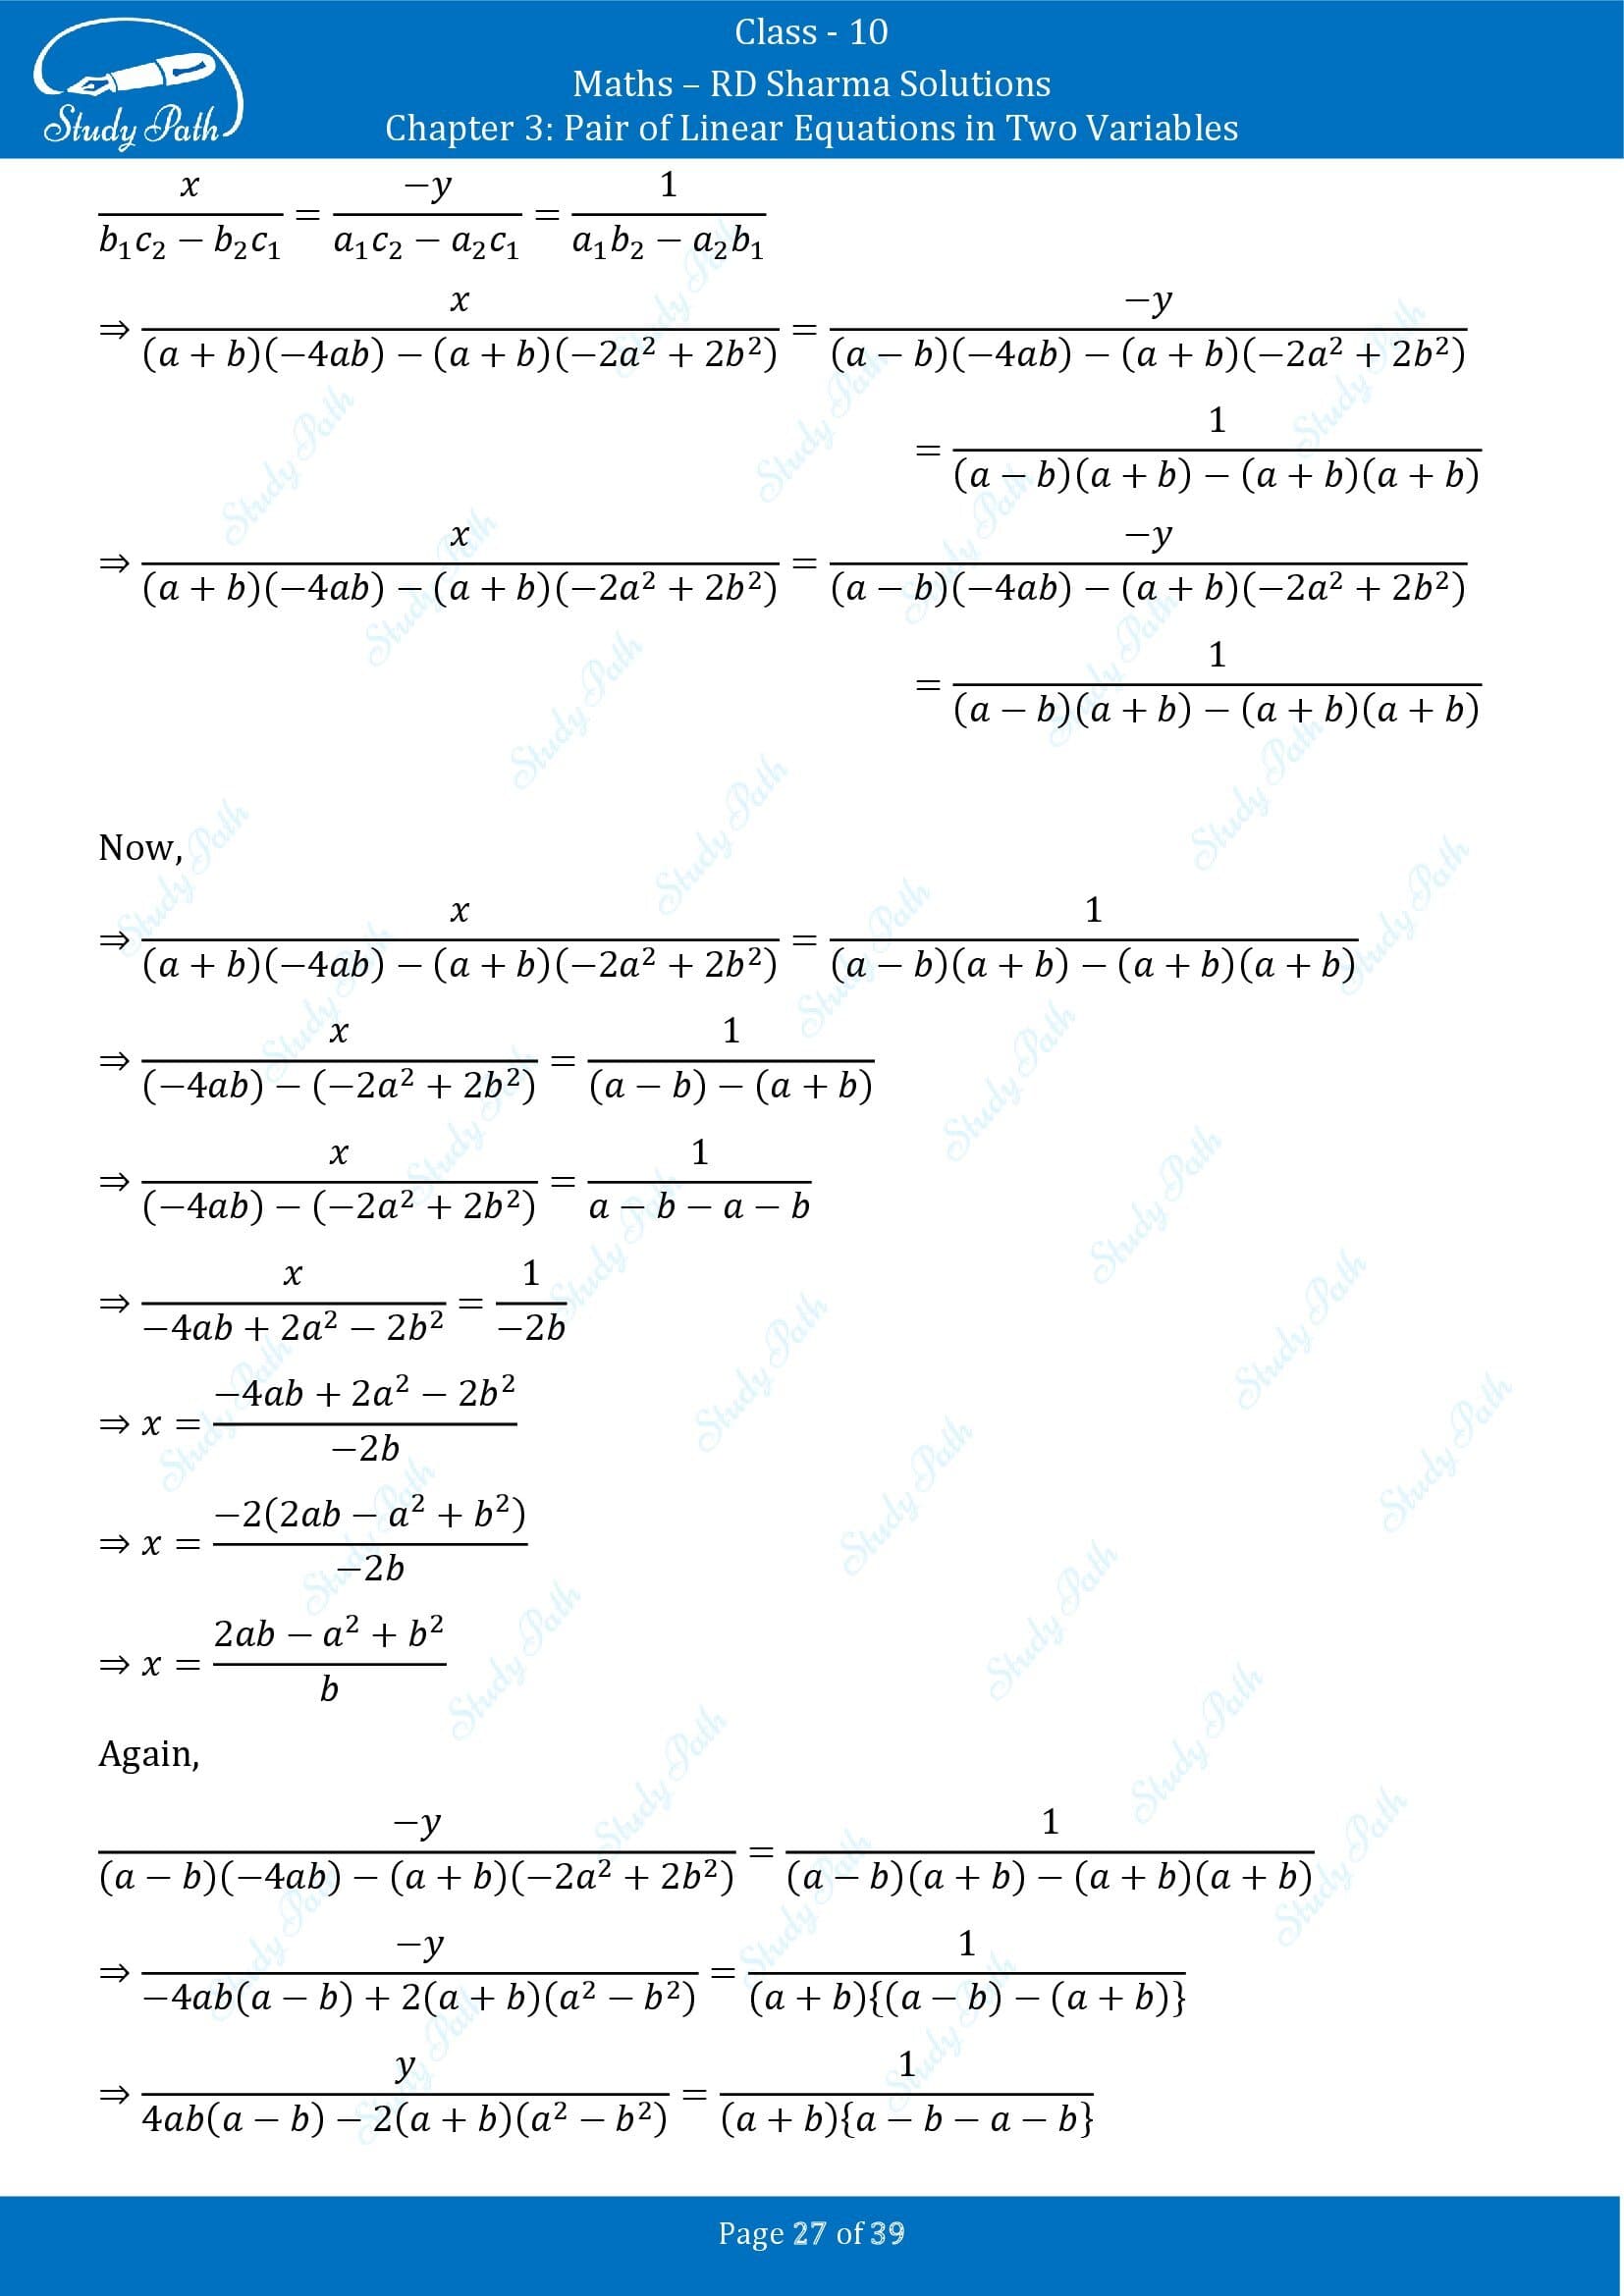 RD Sharma Solutions Class 10 Chapter 3 Pair of Linear Equations in Two Variables Exercise 3.4 00027